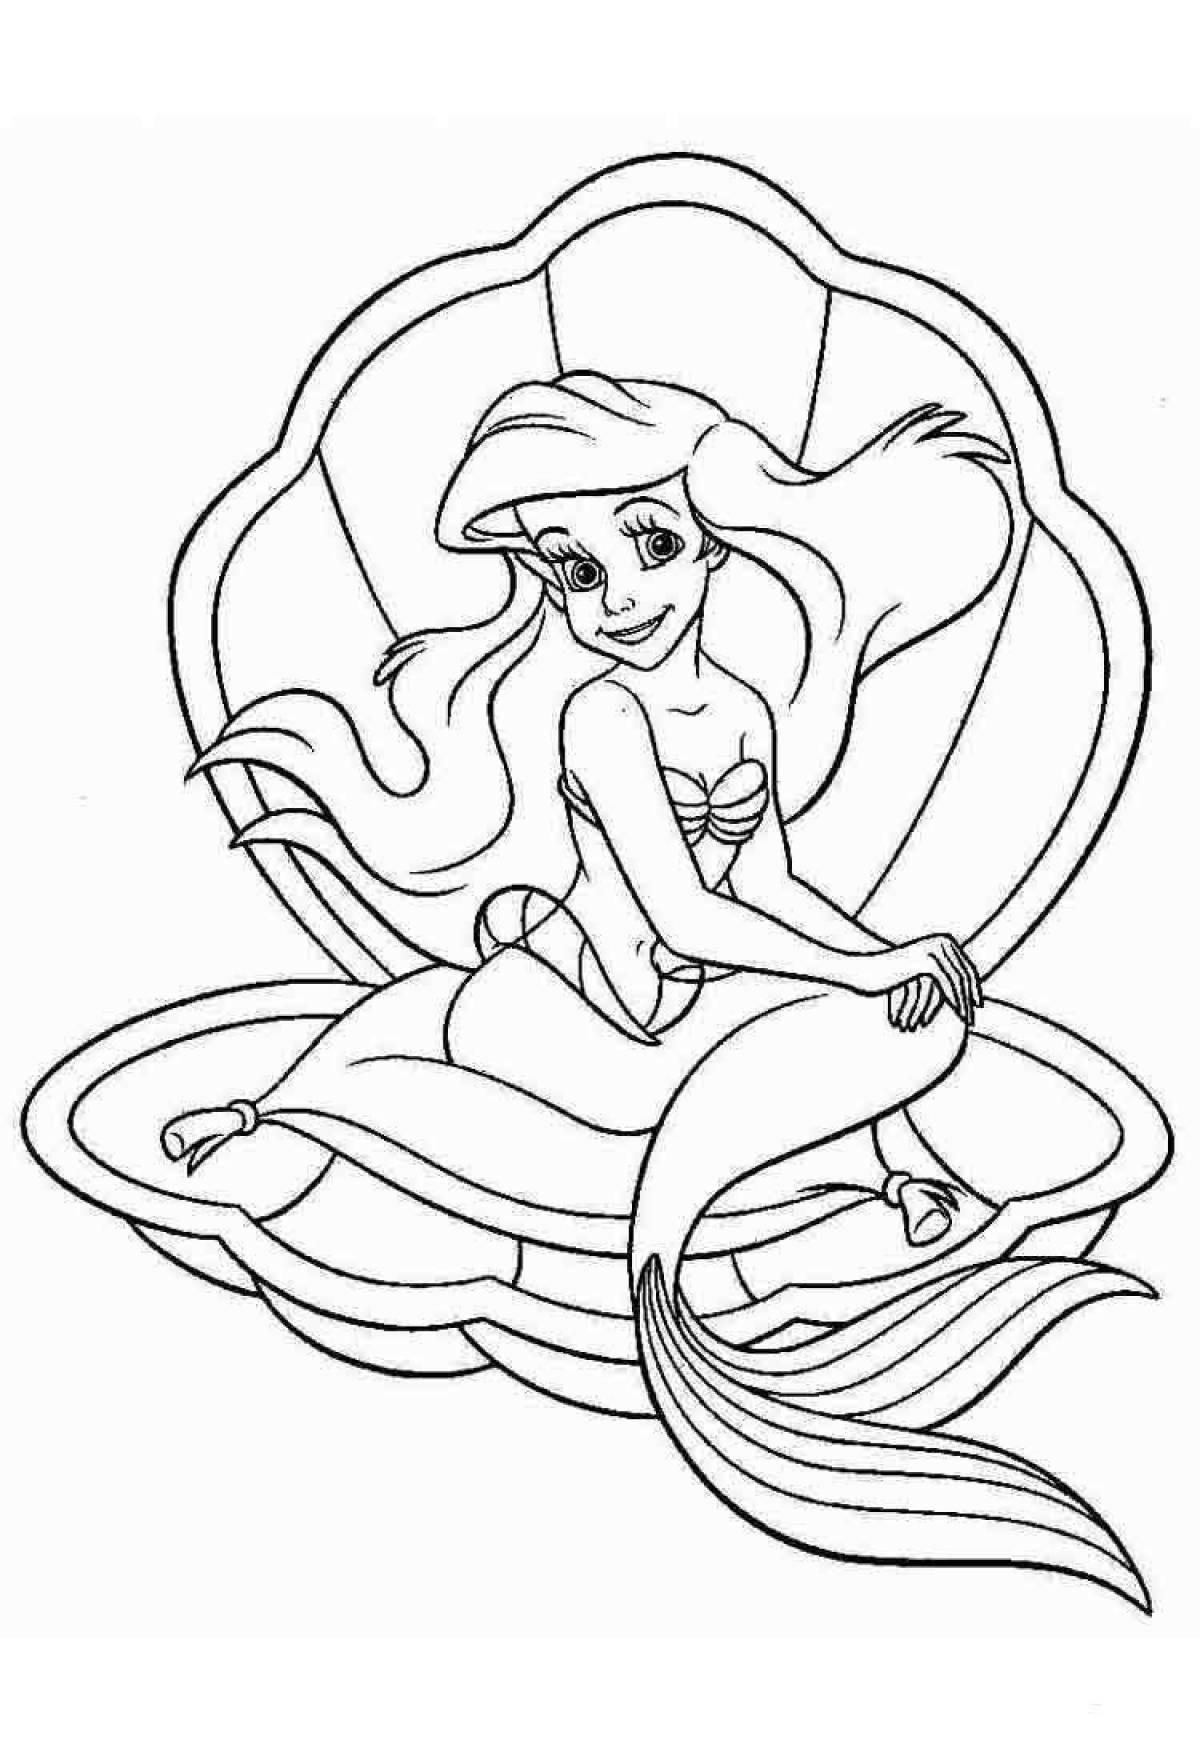 Magic mermaid coloring book for 3-4 year olds